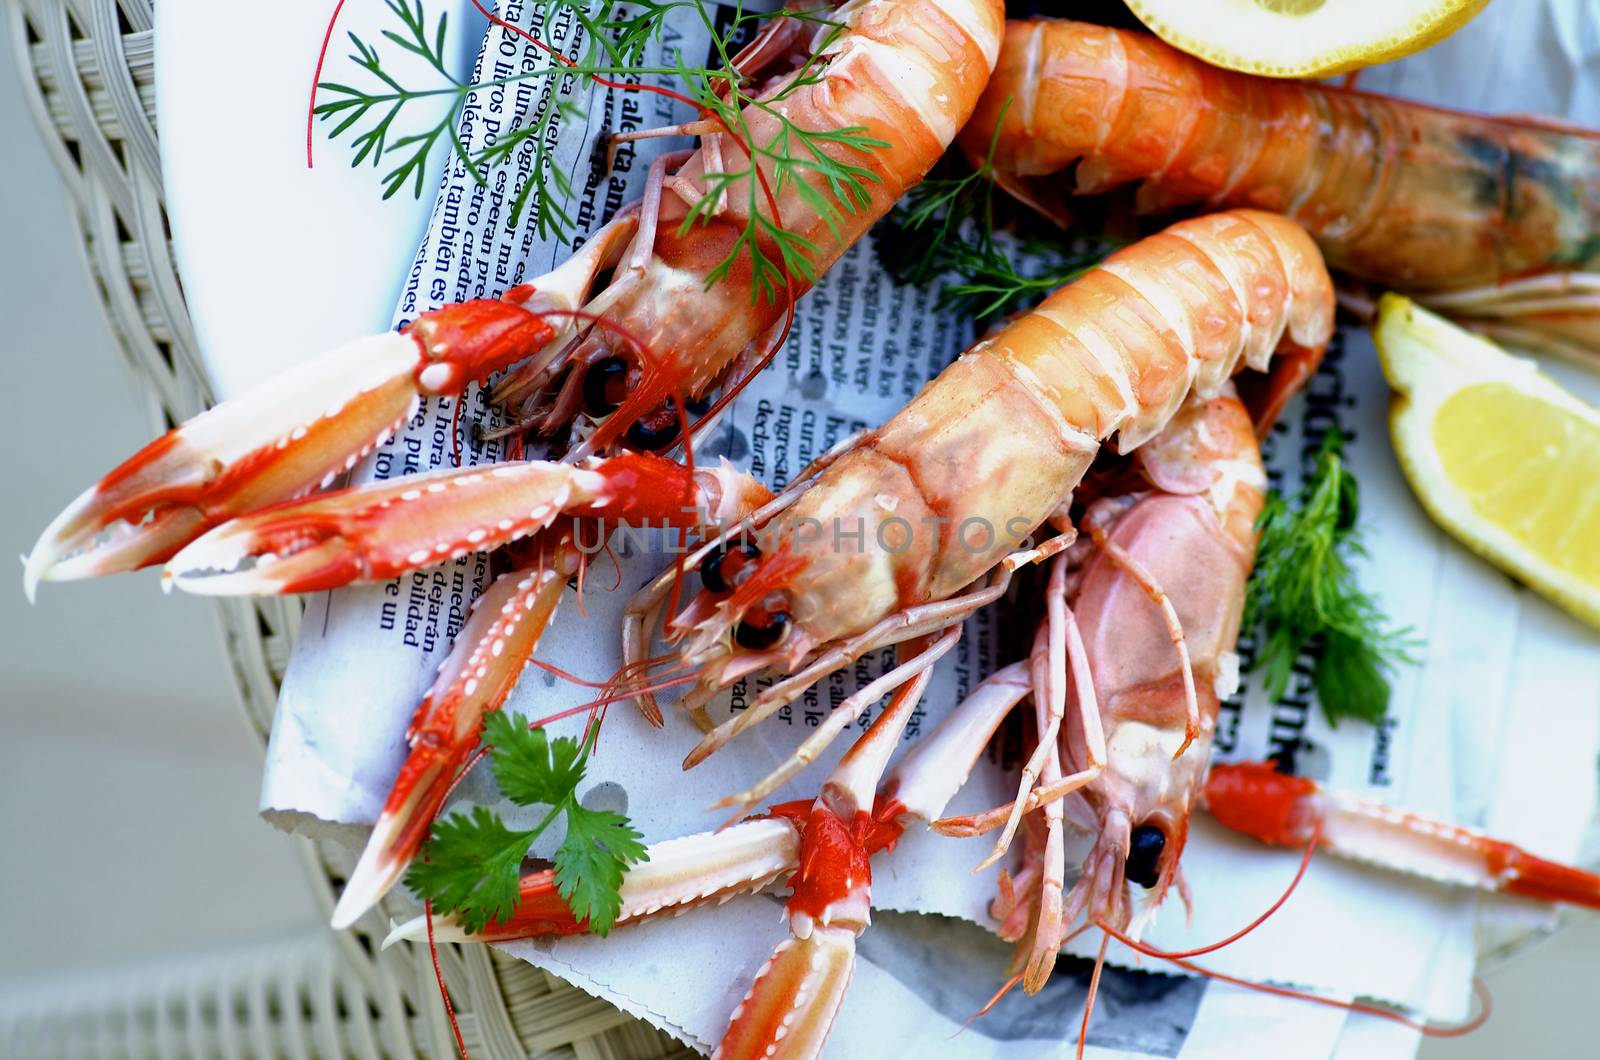 Delicious Grilled Langoustines with Lemon and Parsley on Newspaper closeup on Wicker background. Top View